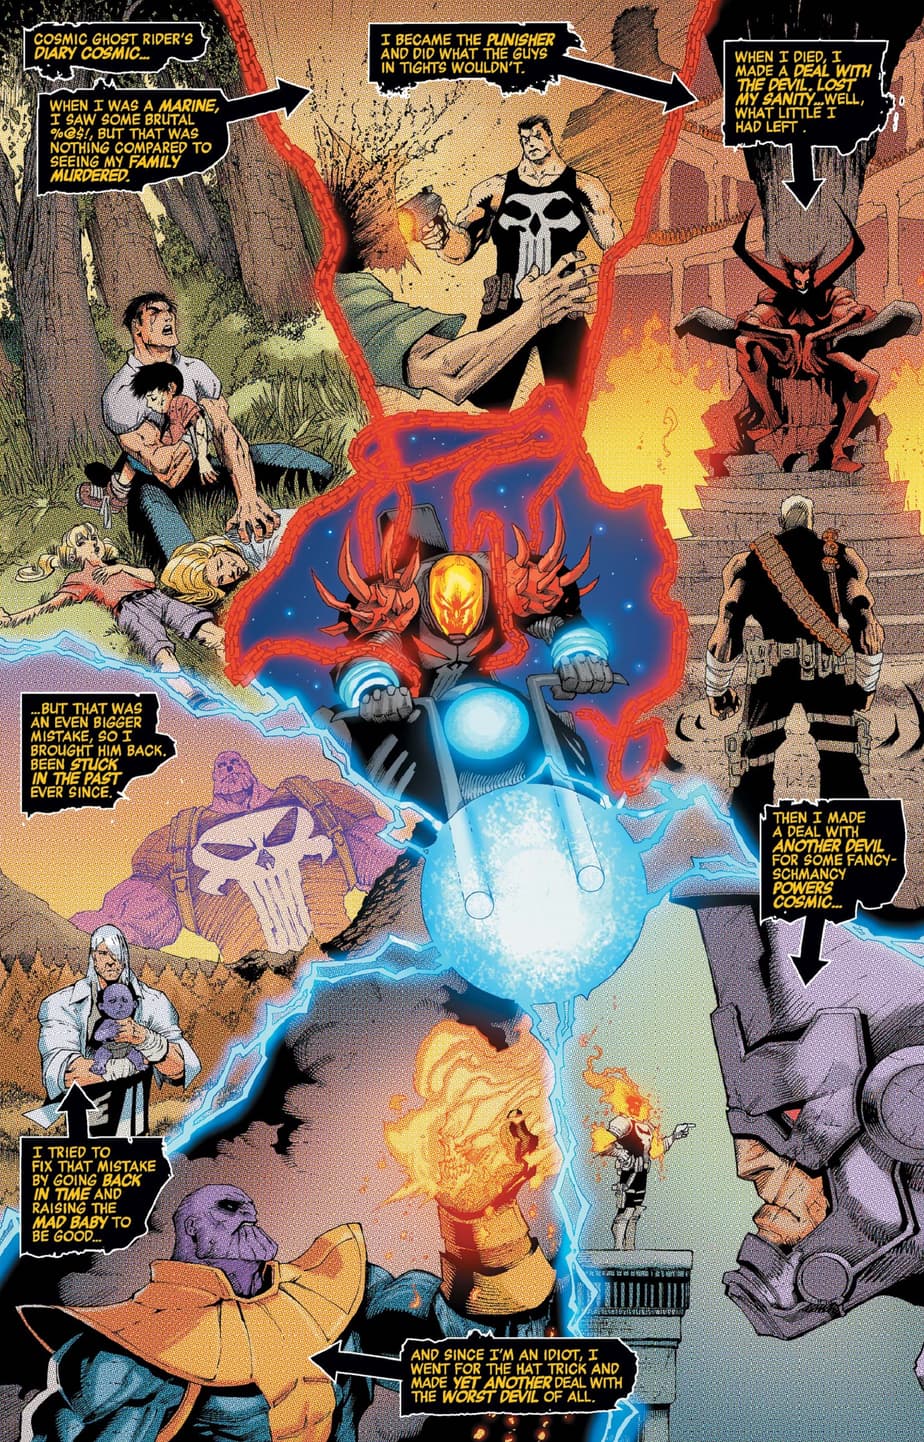 The backstory of the Cosmic Ghost Rider in COSMIC GHOST RIDER DESTROYS MARVEL HISTORY (2019) #1.